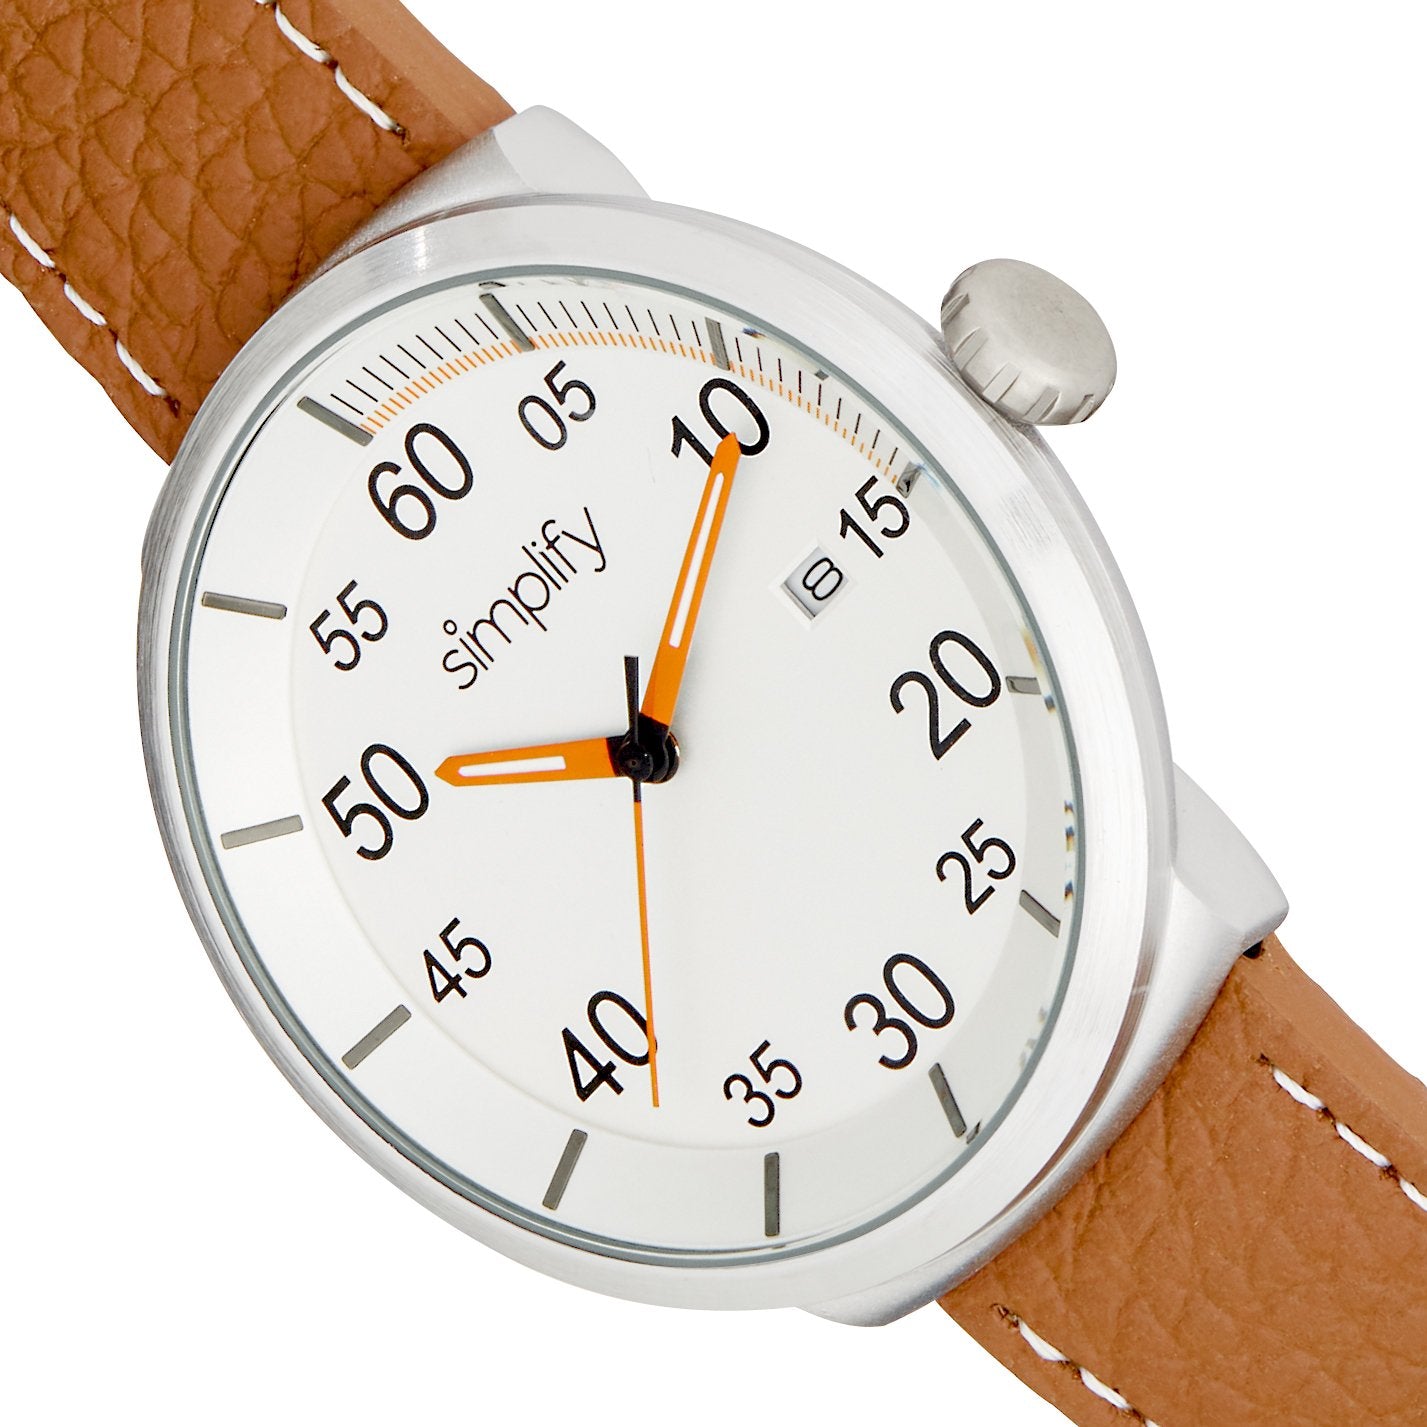 Simplify The 7100 Leather-Band Watch w/Date - Brown/Silver - SIM7102